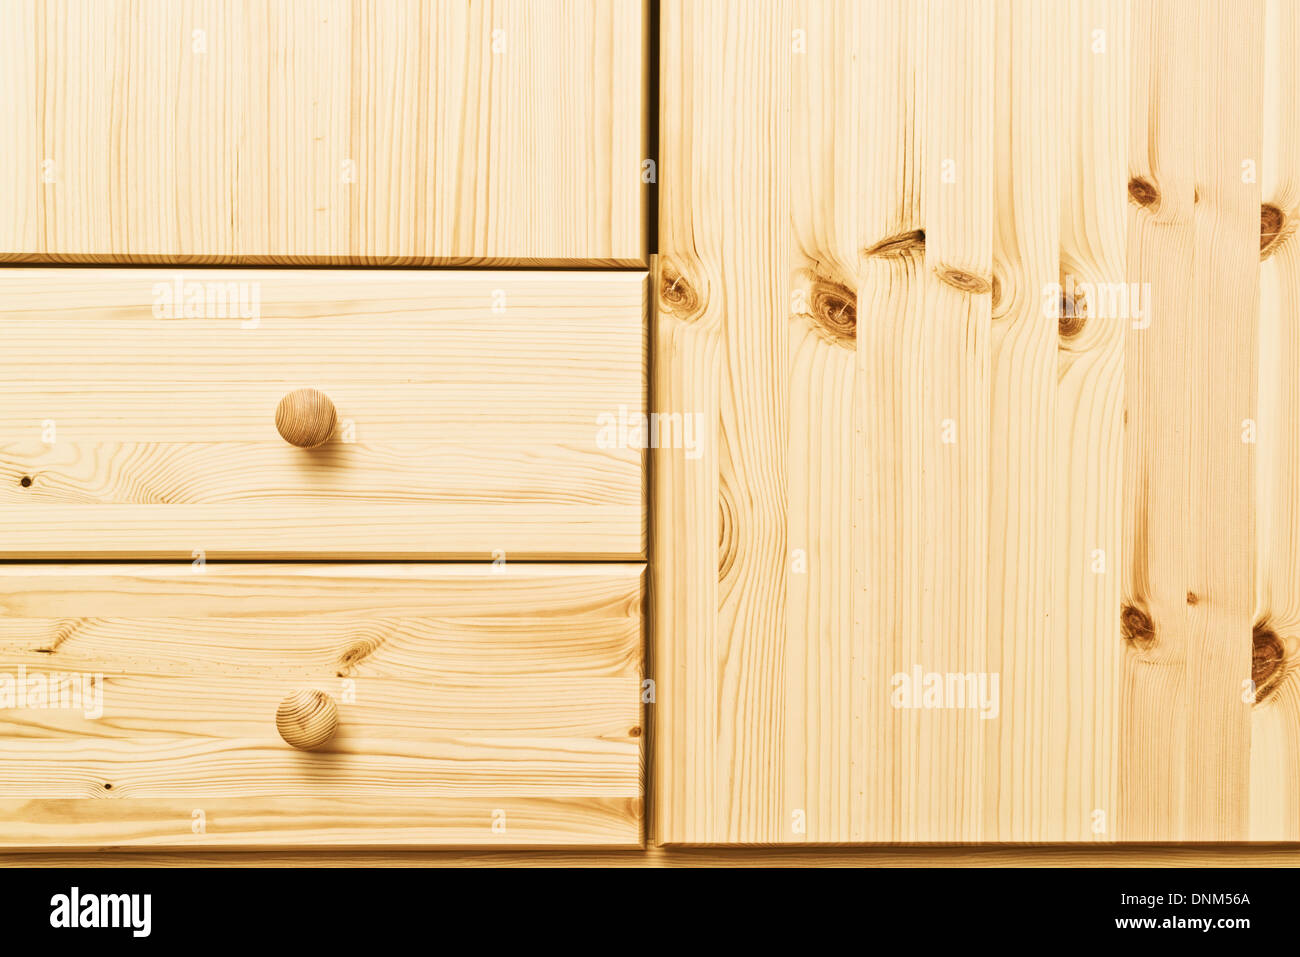 Wooden drawers Stock Photo by ©Baloncici 2074034